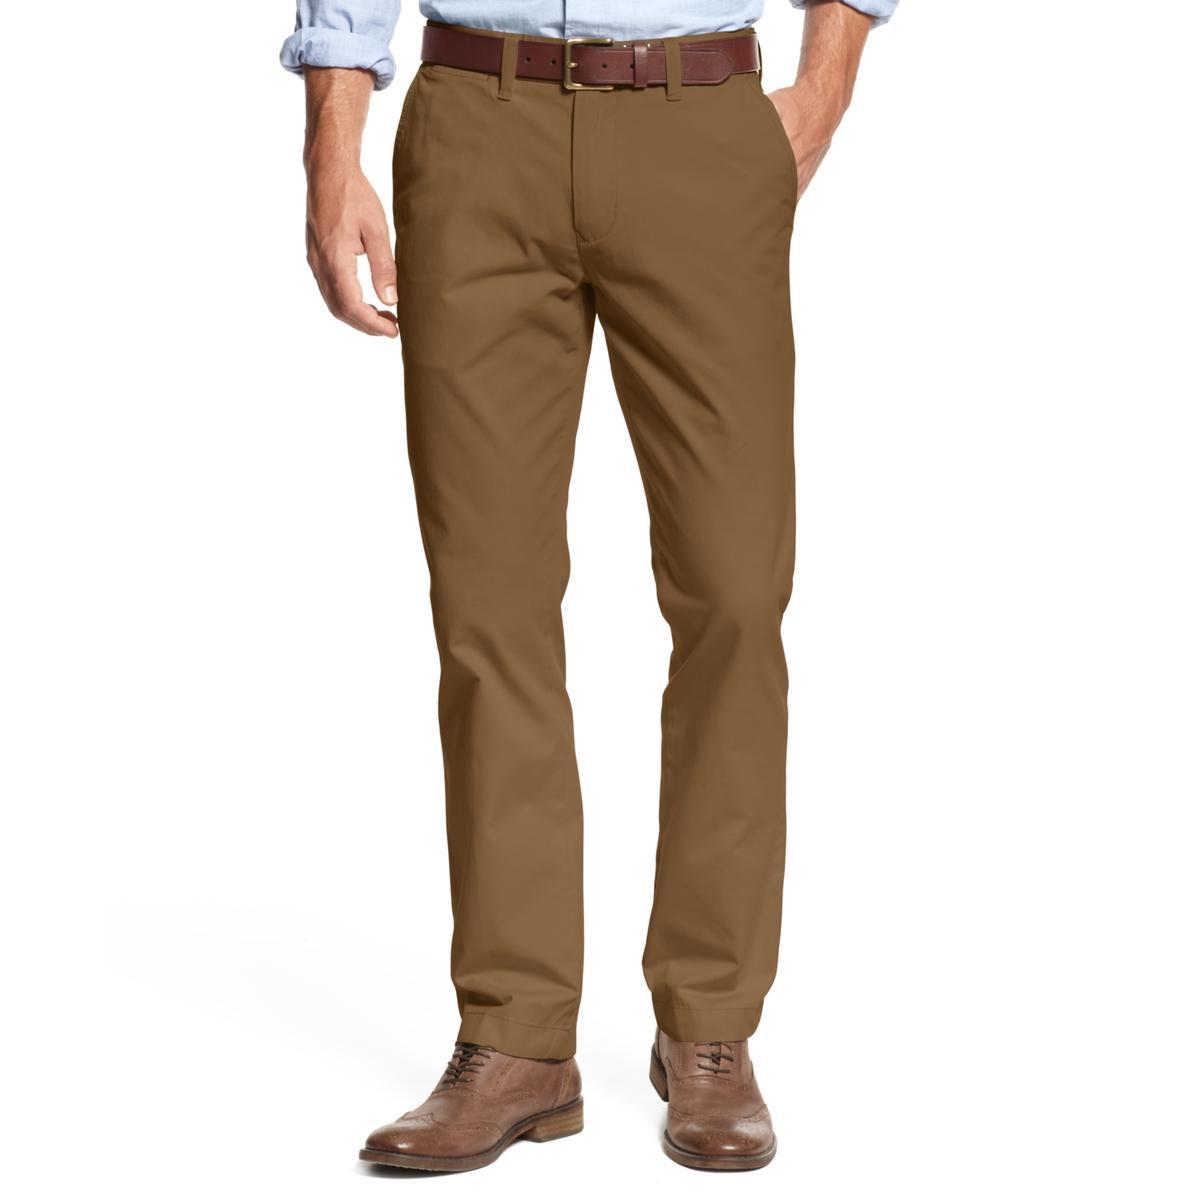 Lyst - Tommy Hilfiger Classic Fit Straight Leg Chino Pants in Brown for Men